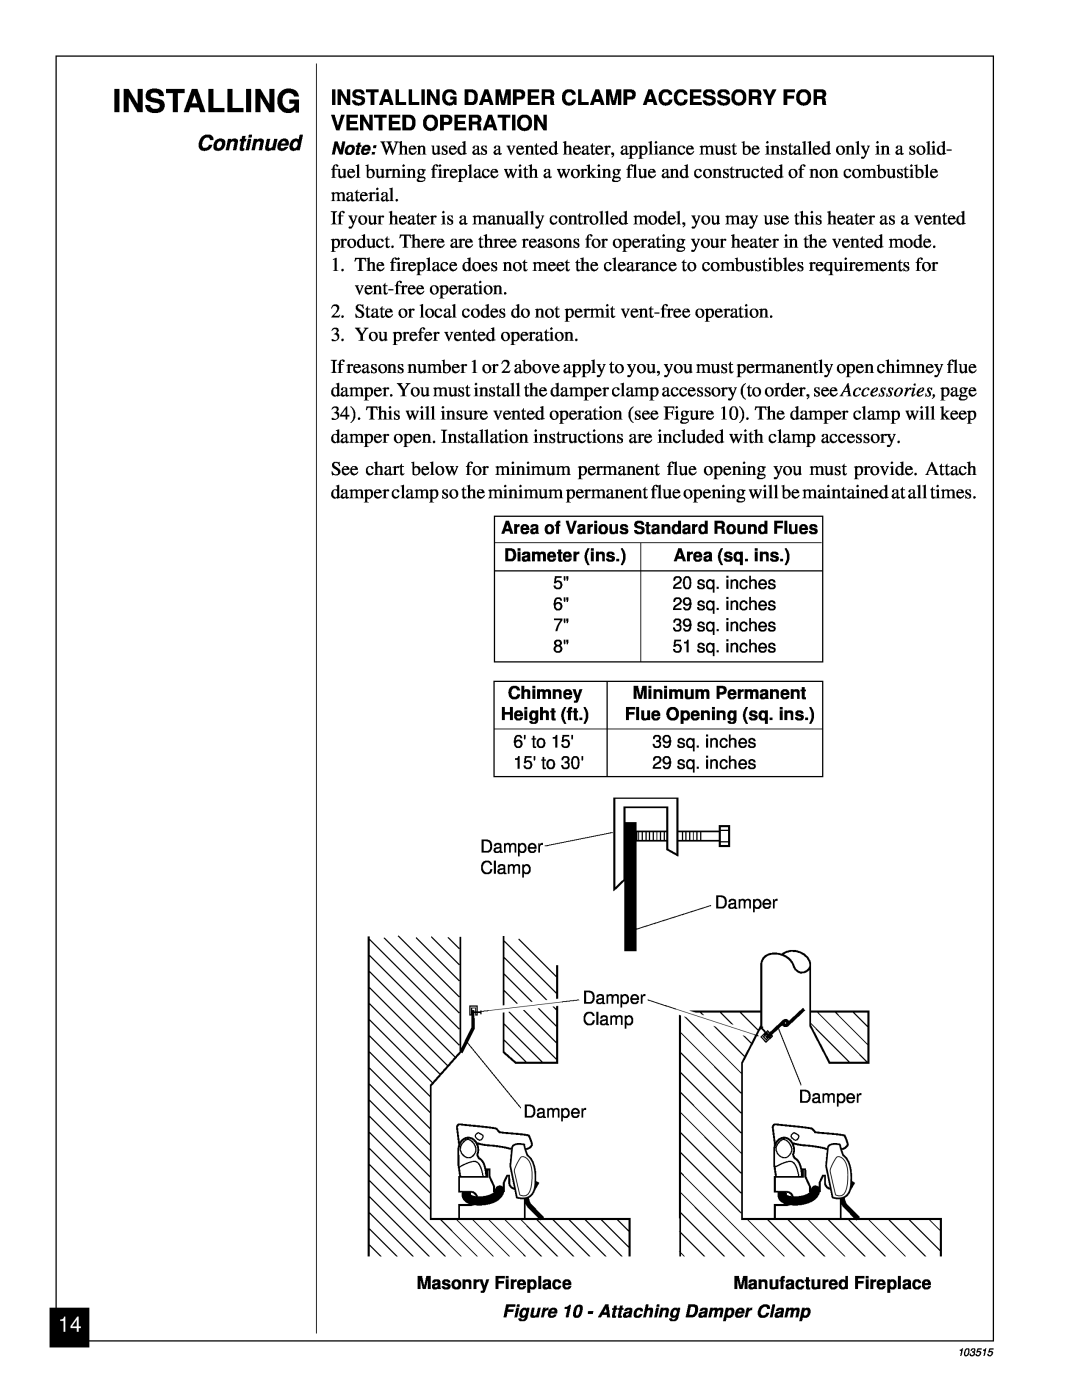 Vanguard Heating Gas Log Heater installation manual Installing, Continued, You prefer vented operation 